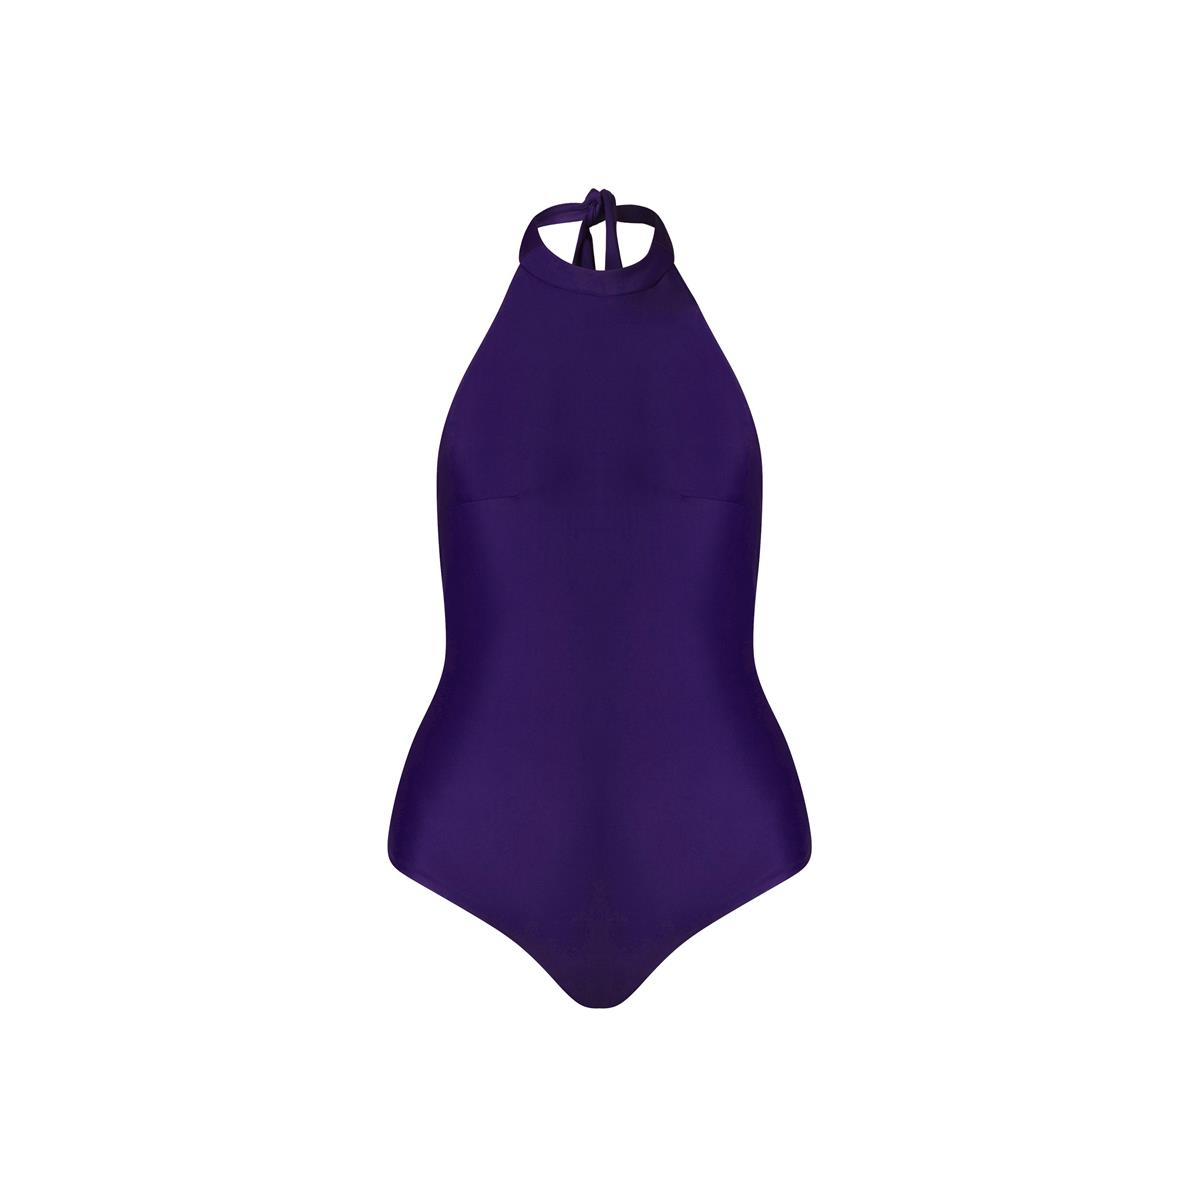 MARGARET AND HERMIONE_SS19_Swimsuit No.4_violet_EUR 157,00